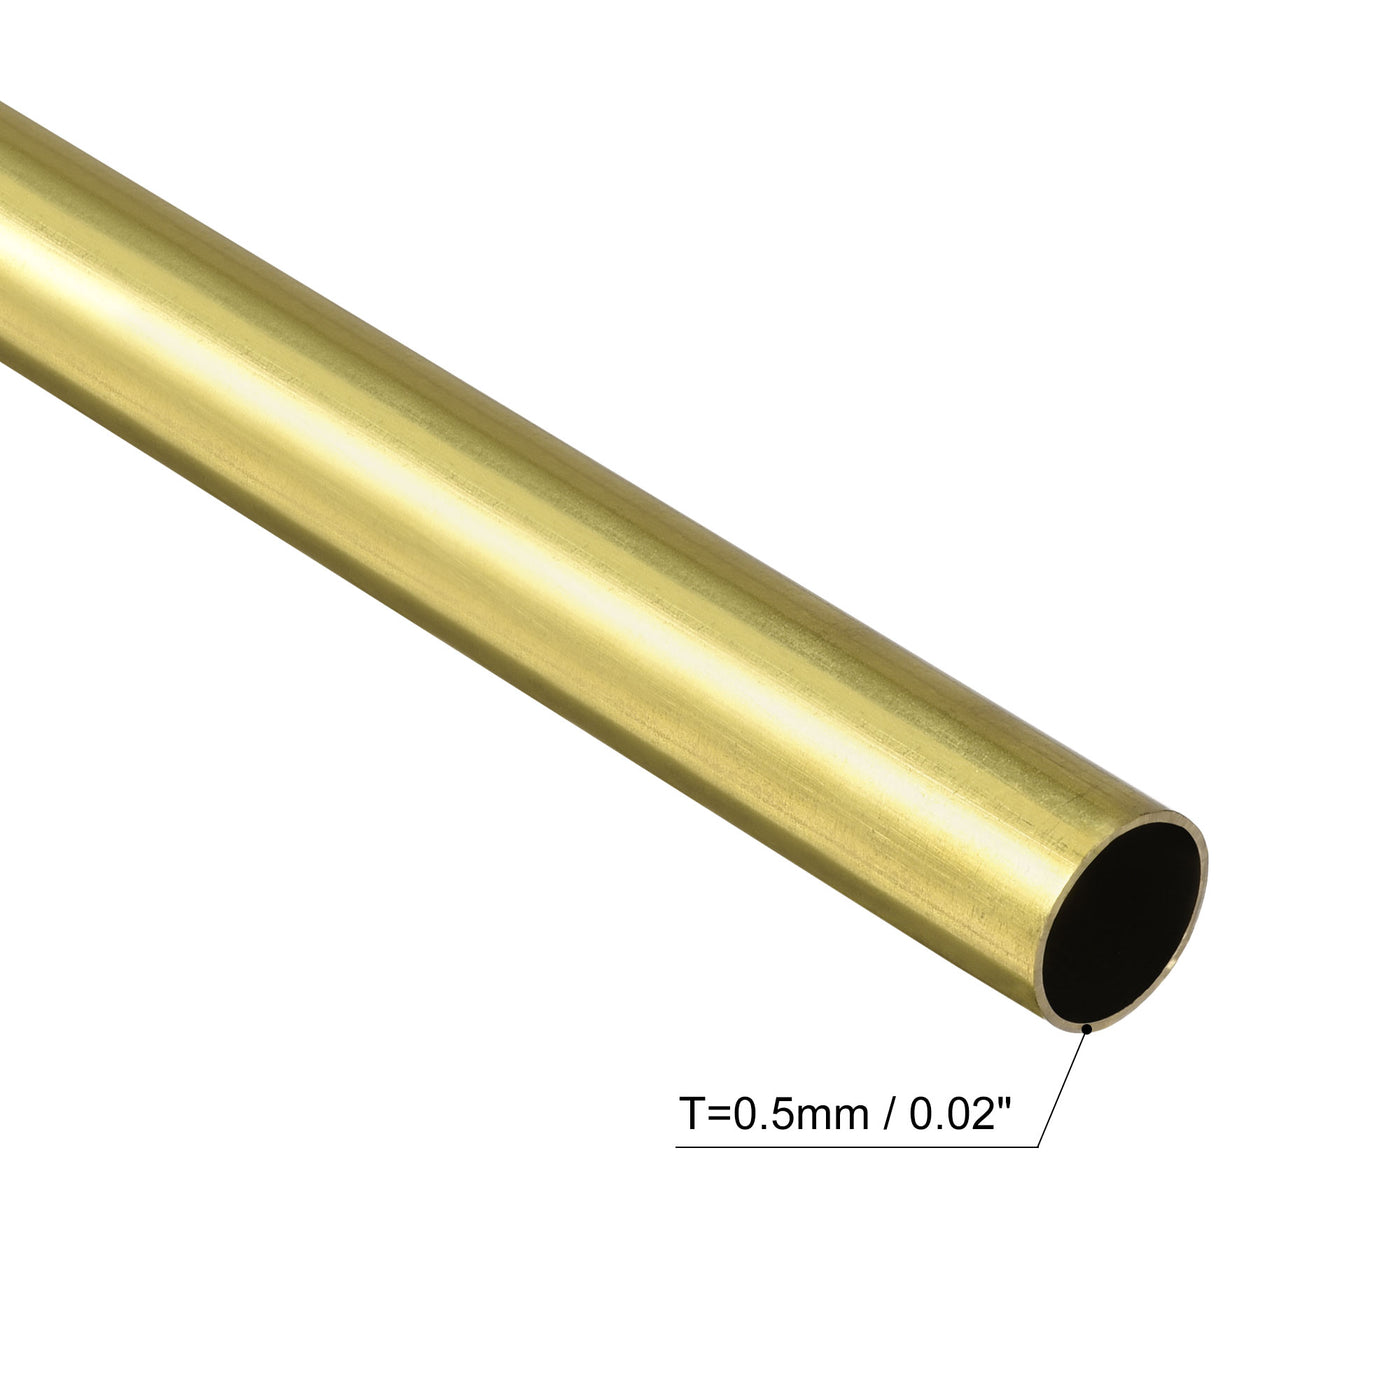 uxcell Uxcell 3Pcs 8mm x 0.5mm x 400mm Seamless Straight Brass Tube for Industry DIY Projects